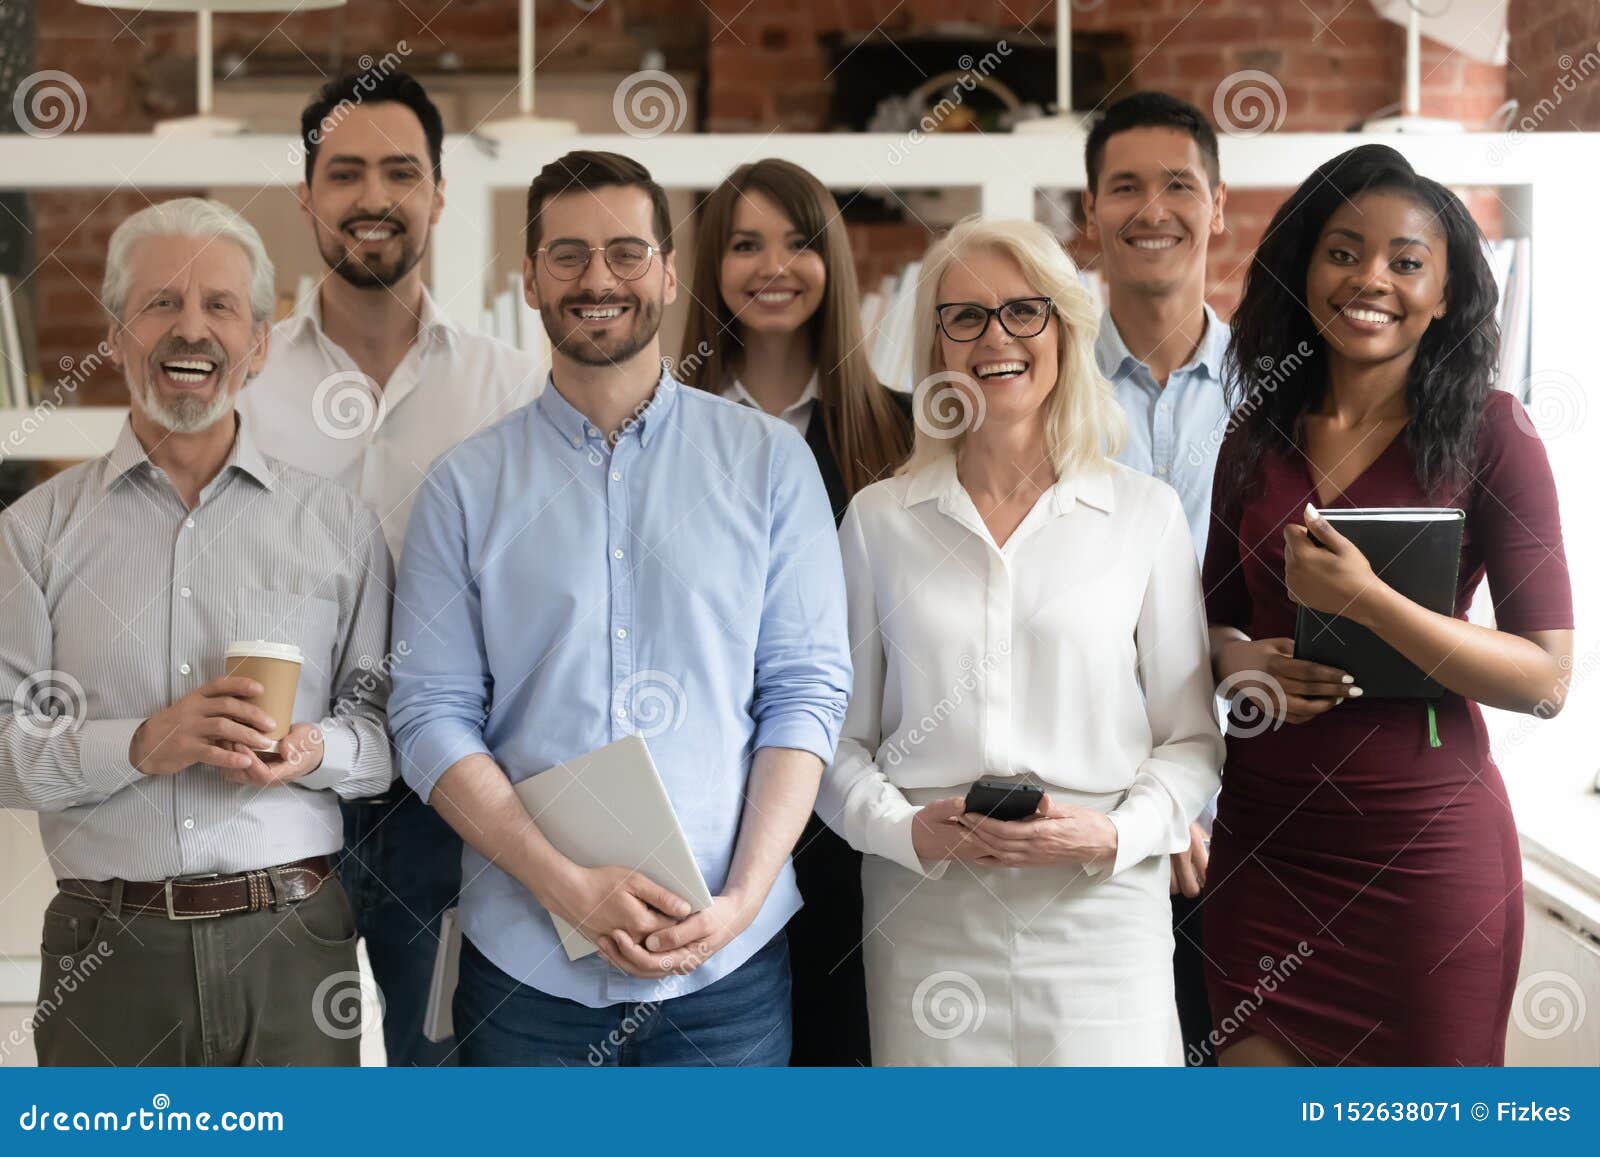 happy diverse business team standing in office looking at camera